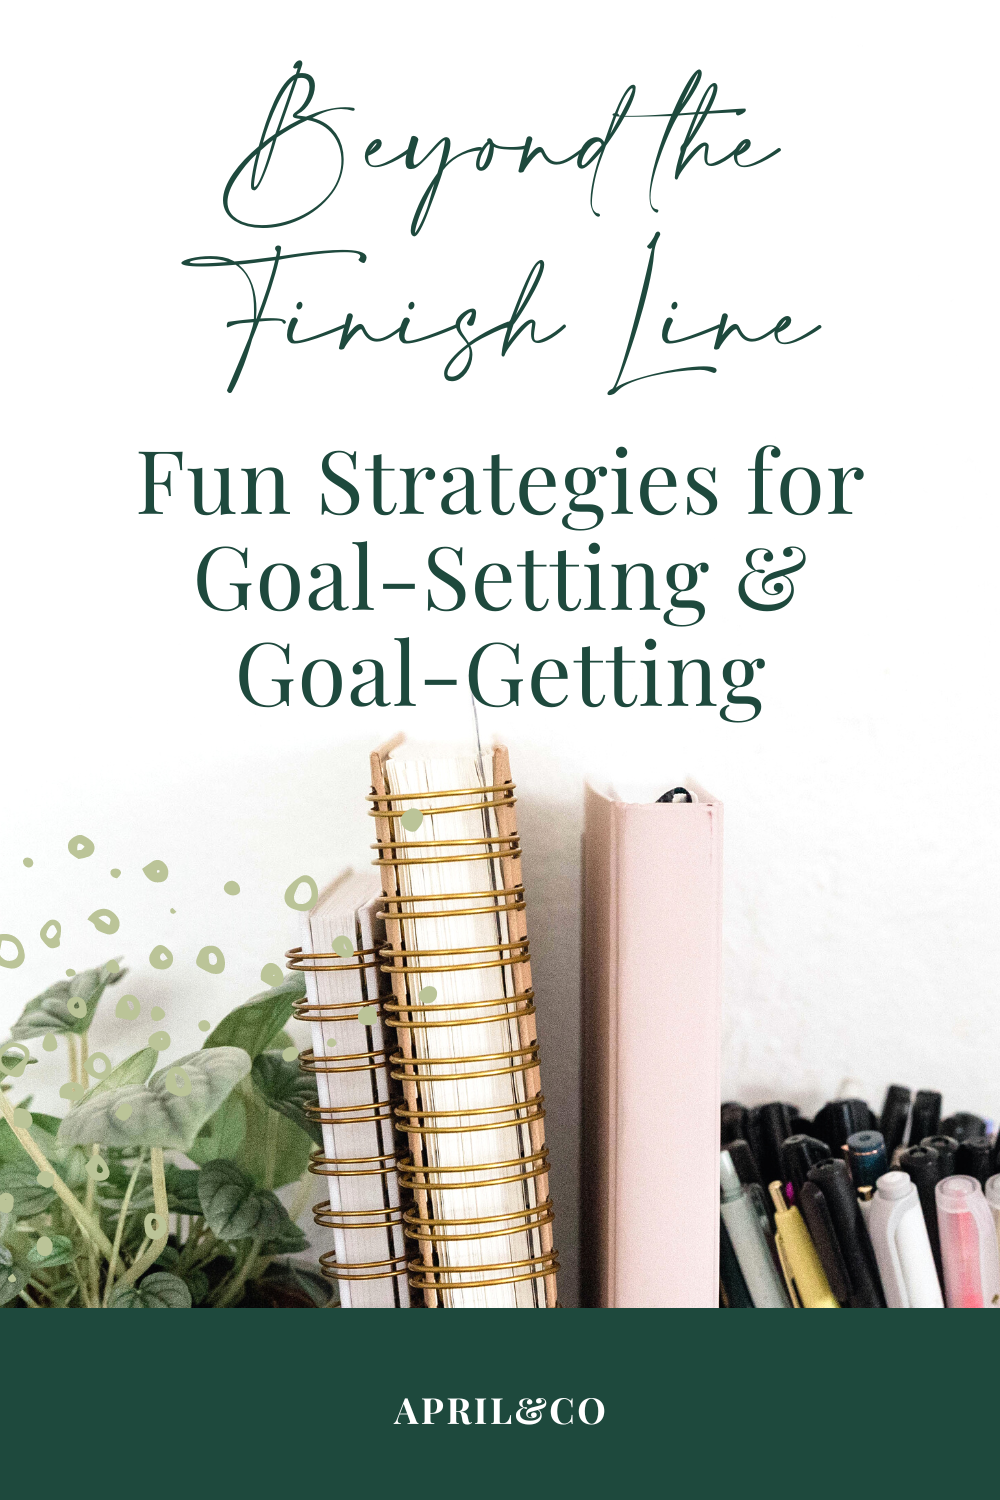 Strategies for Goal-Setting | April & Co Online Business Management